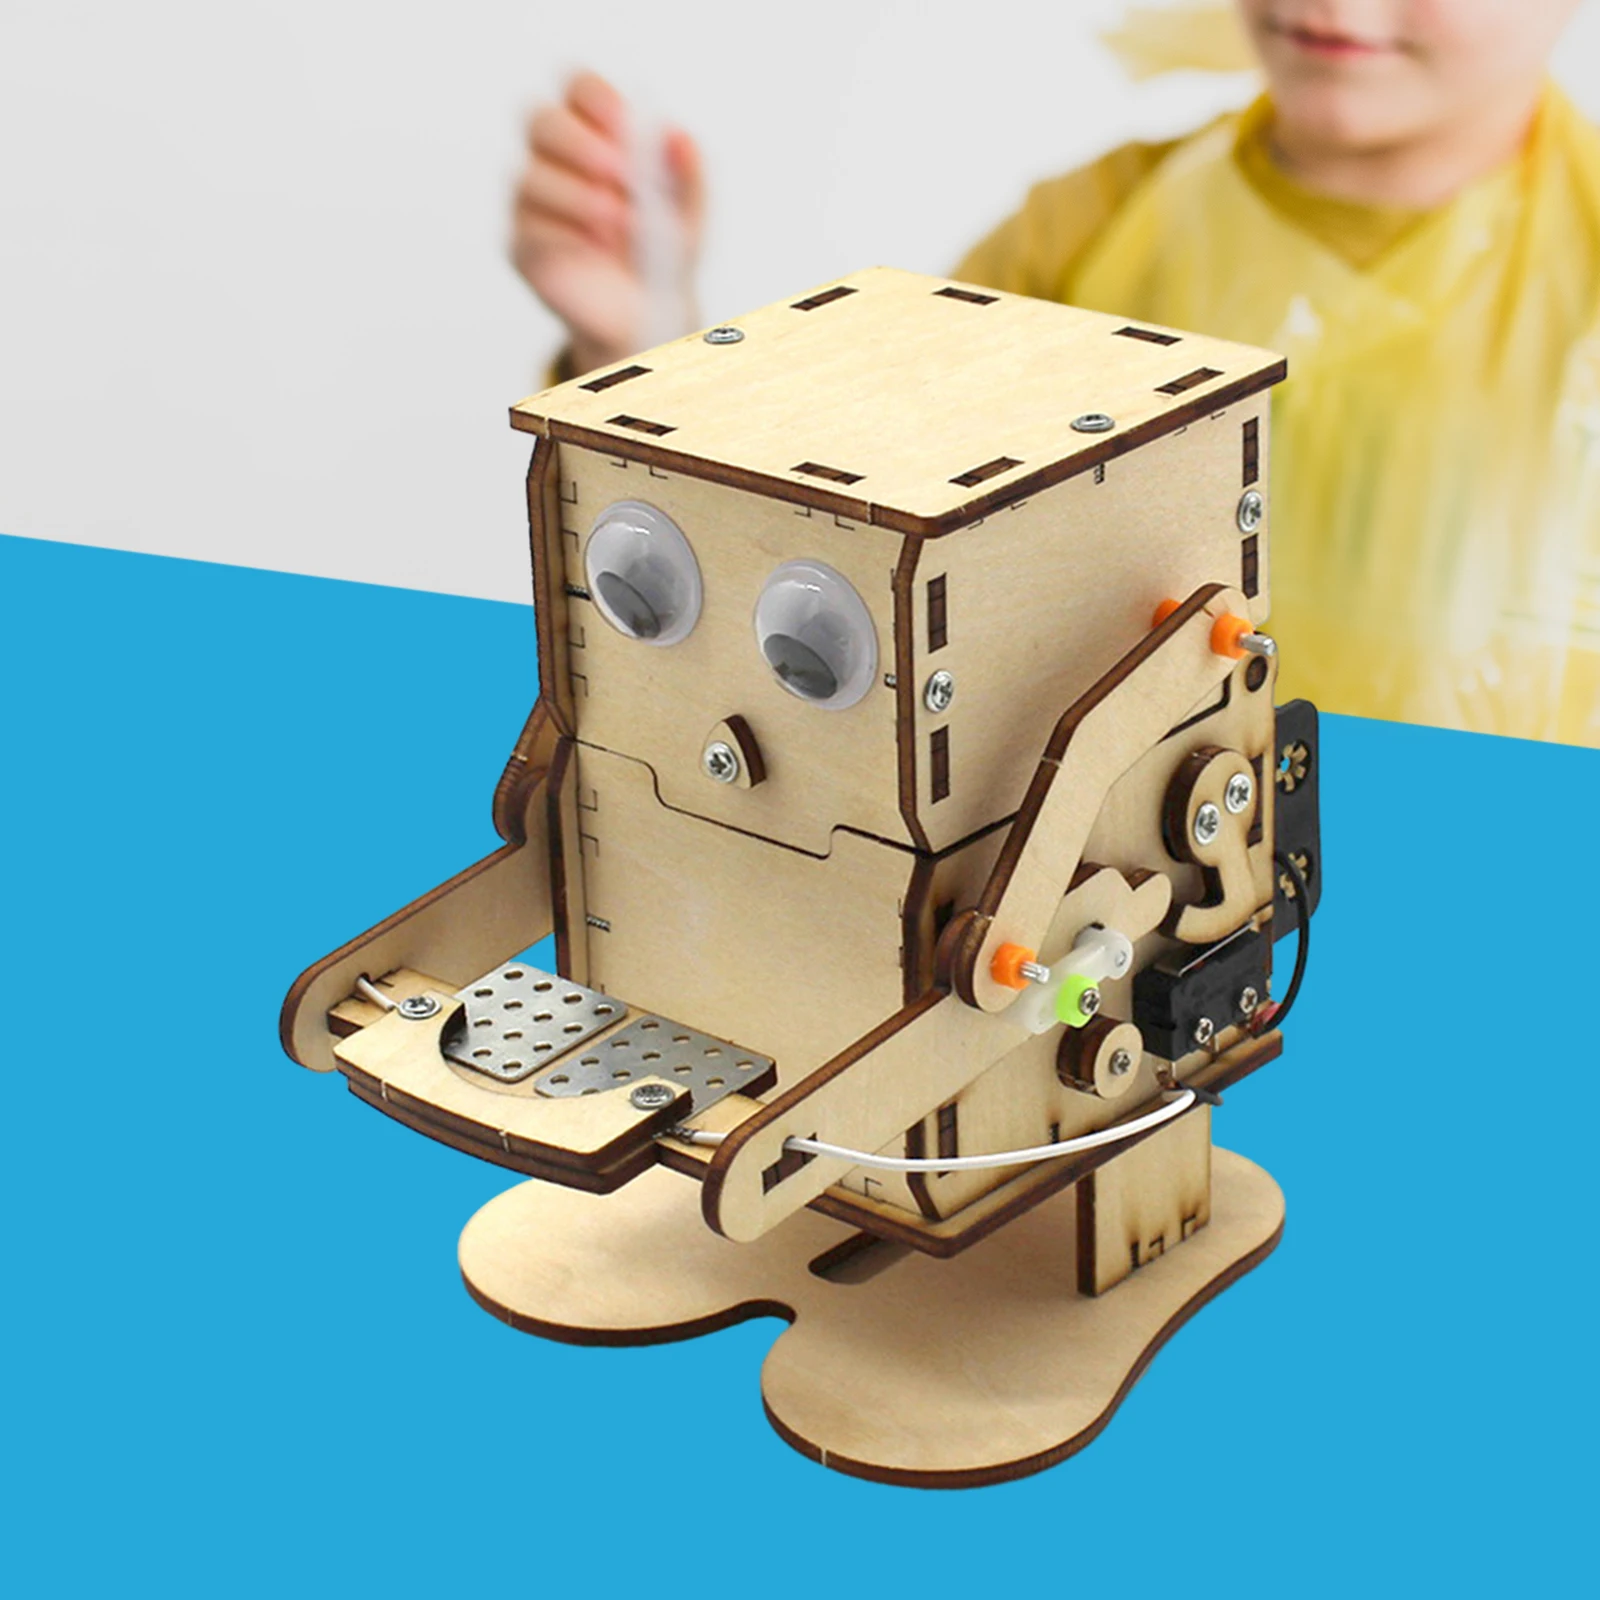 DIY Wooden Science Experiment Kits Saving Coins Robot Money Box Science Kits Developmental Toy Funny for Children Birthday Gift